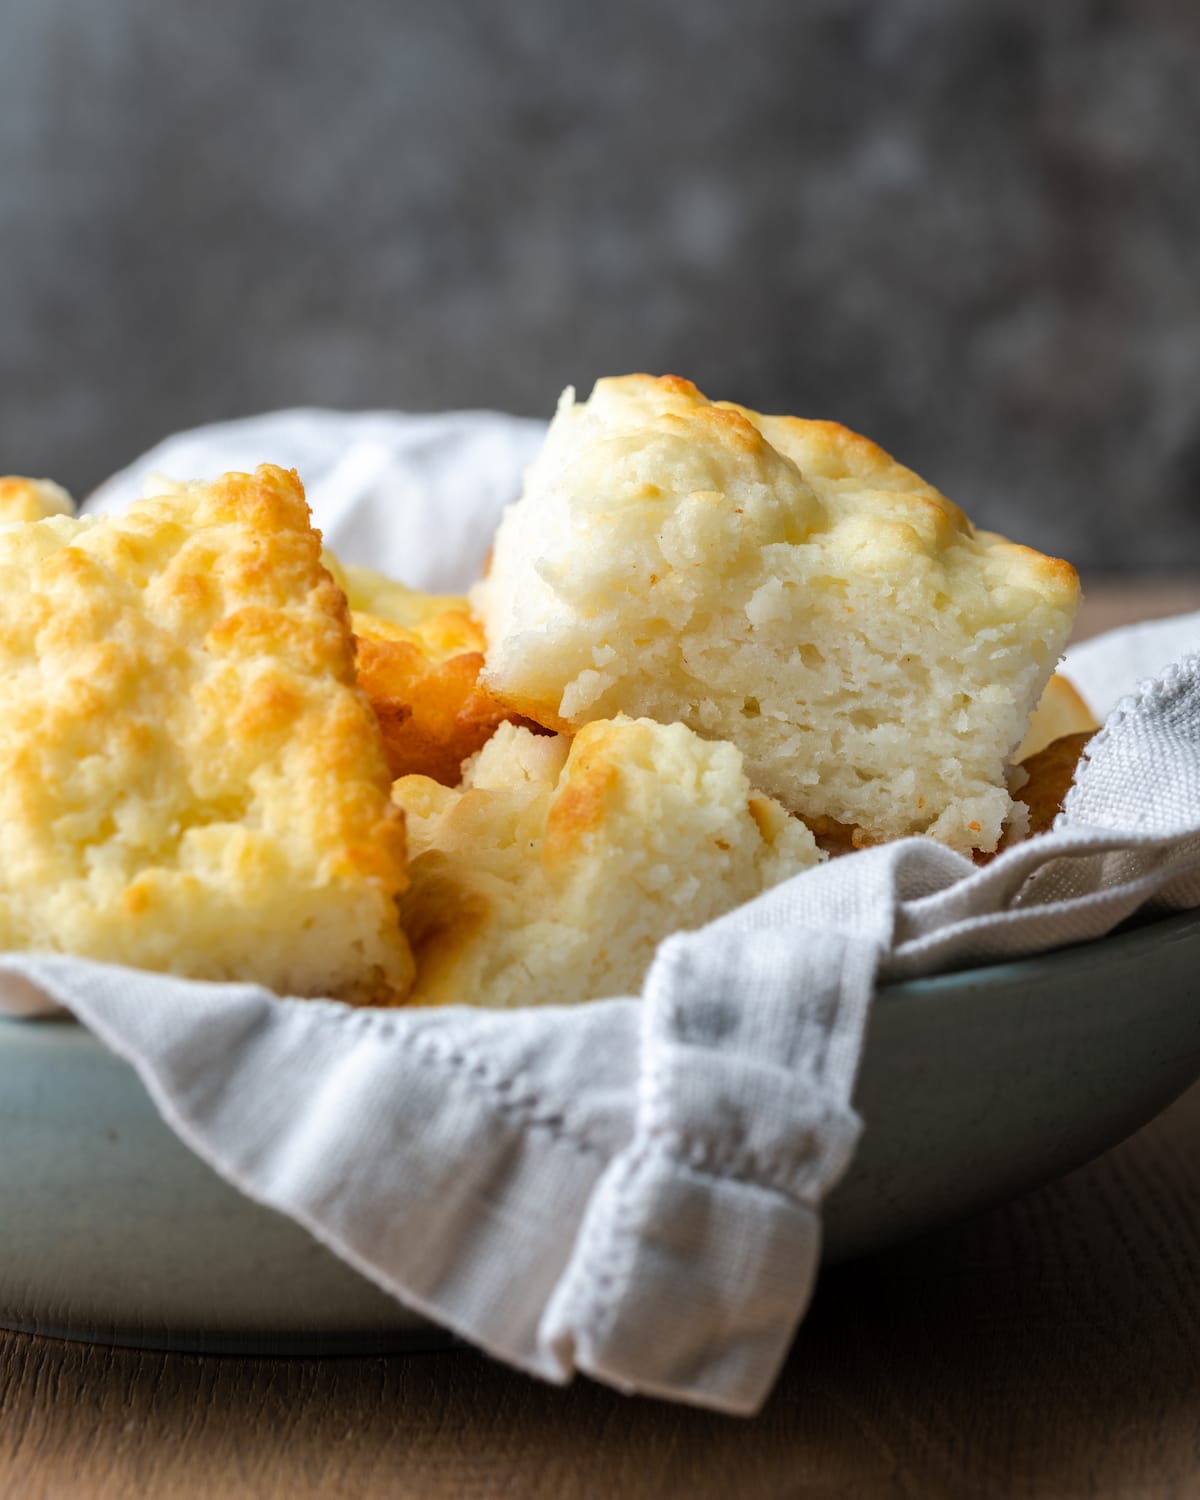 Butter swim biscuits in a serving bowl lined with a cloth.